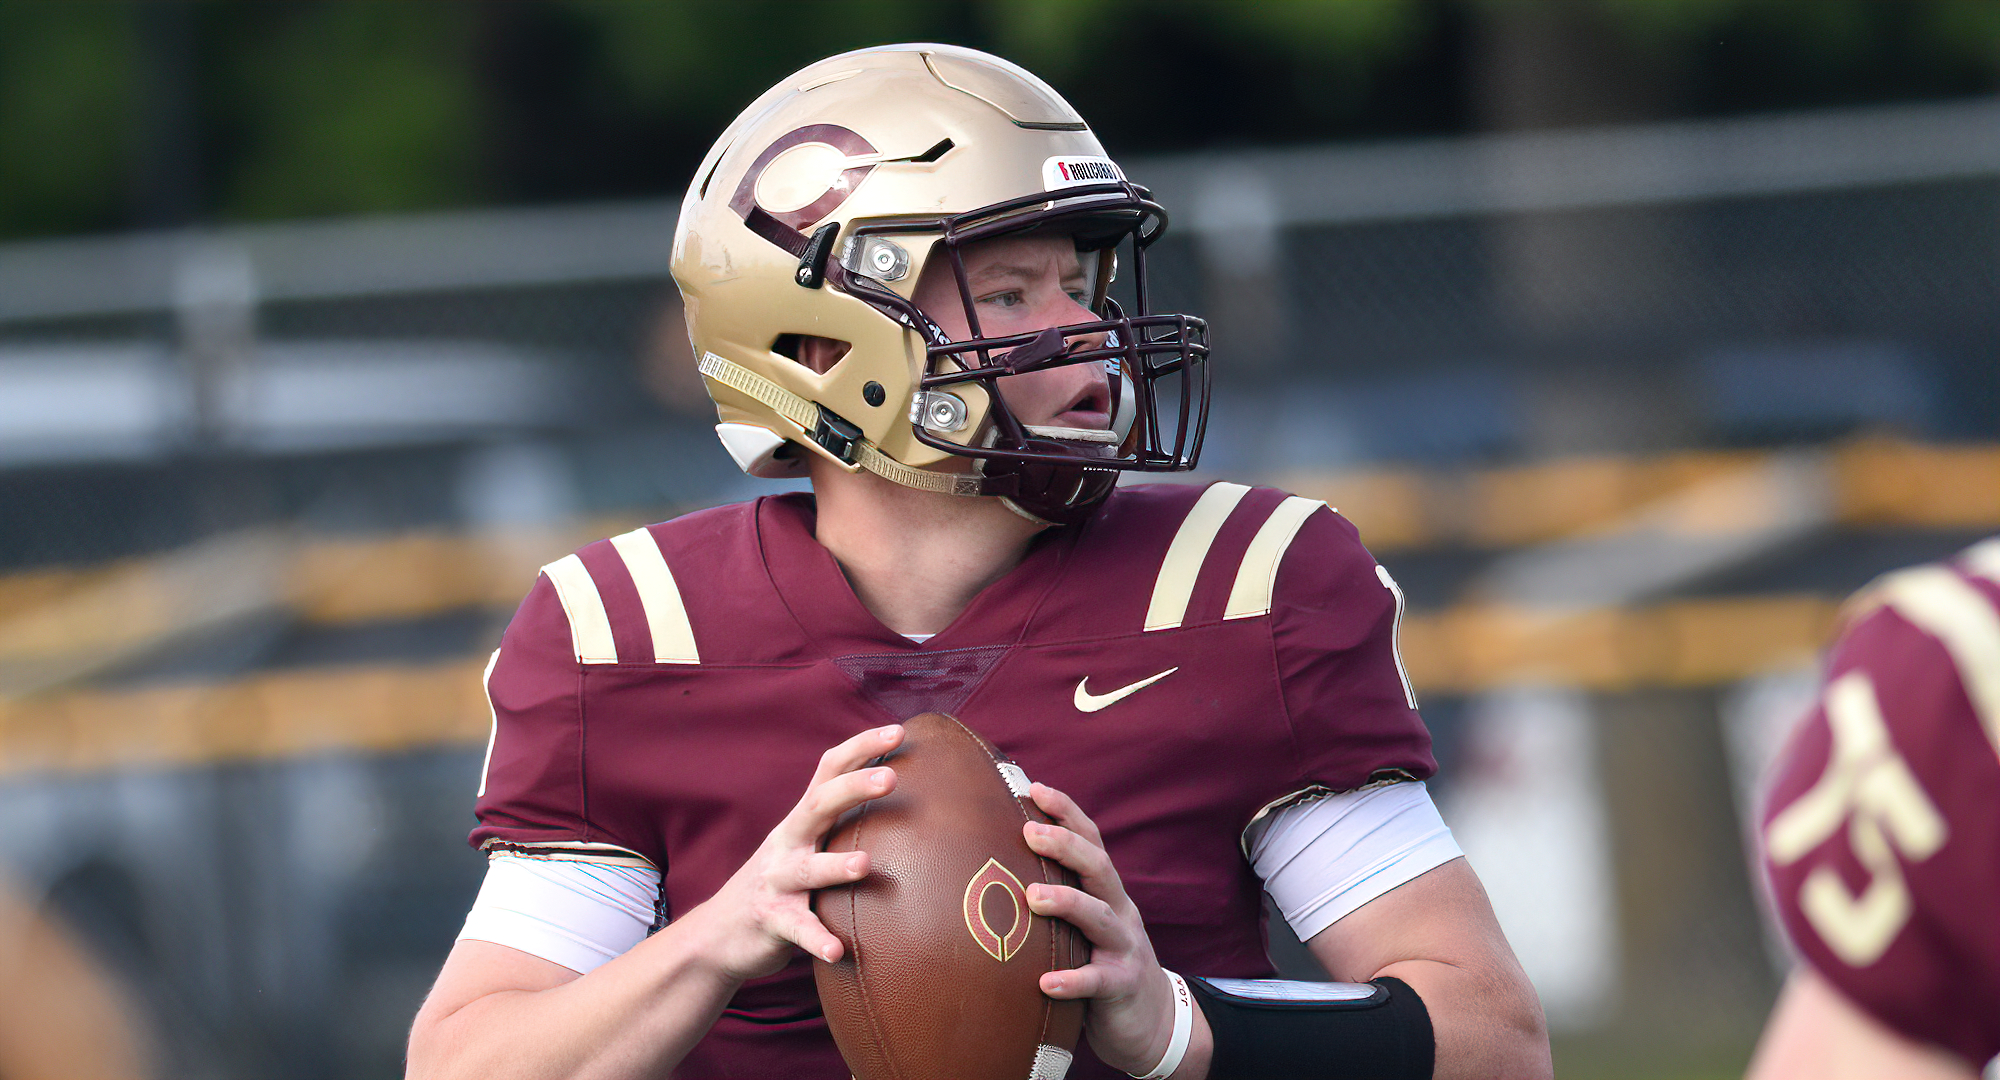 Junior quarterback Cooper Mattern threw for four touchdowns and 367 passing yards in the Cobbers season opener at Wis.-Eau Claire.